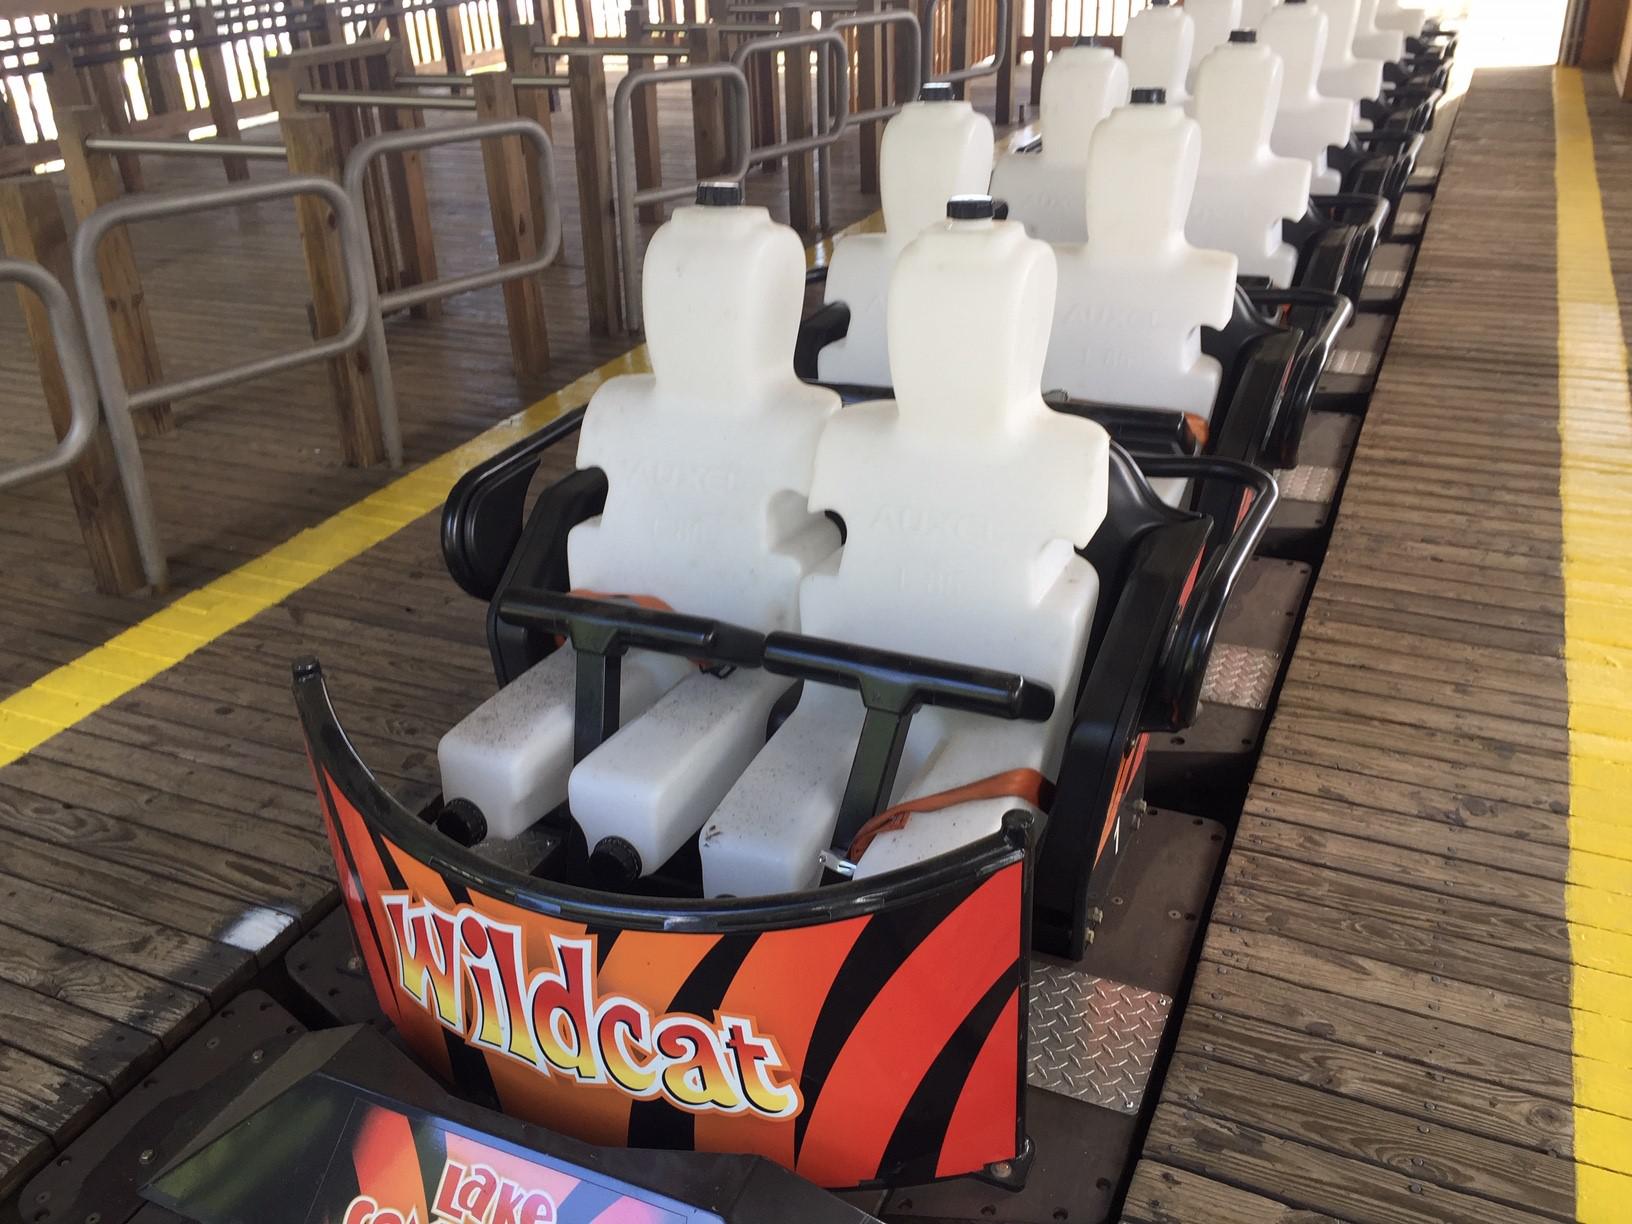 Lake Compounce Opens With New Safety Protocols, Restrictions ...